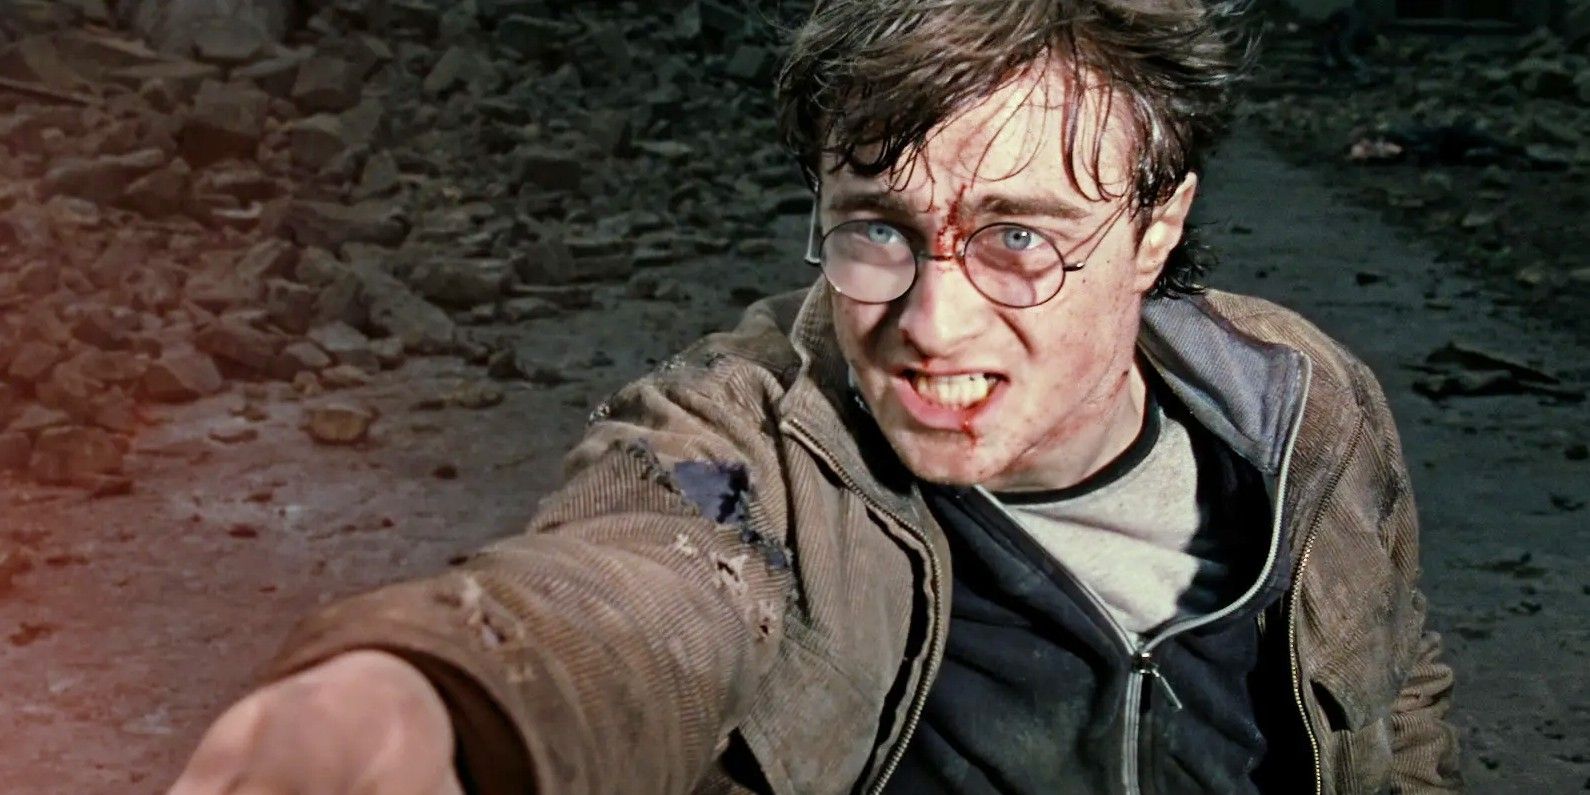 Daniel Radcliffe in Harry Potter and the Deathly Hallows Part